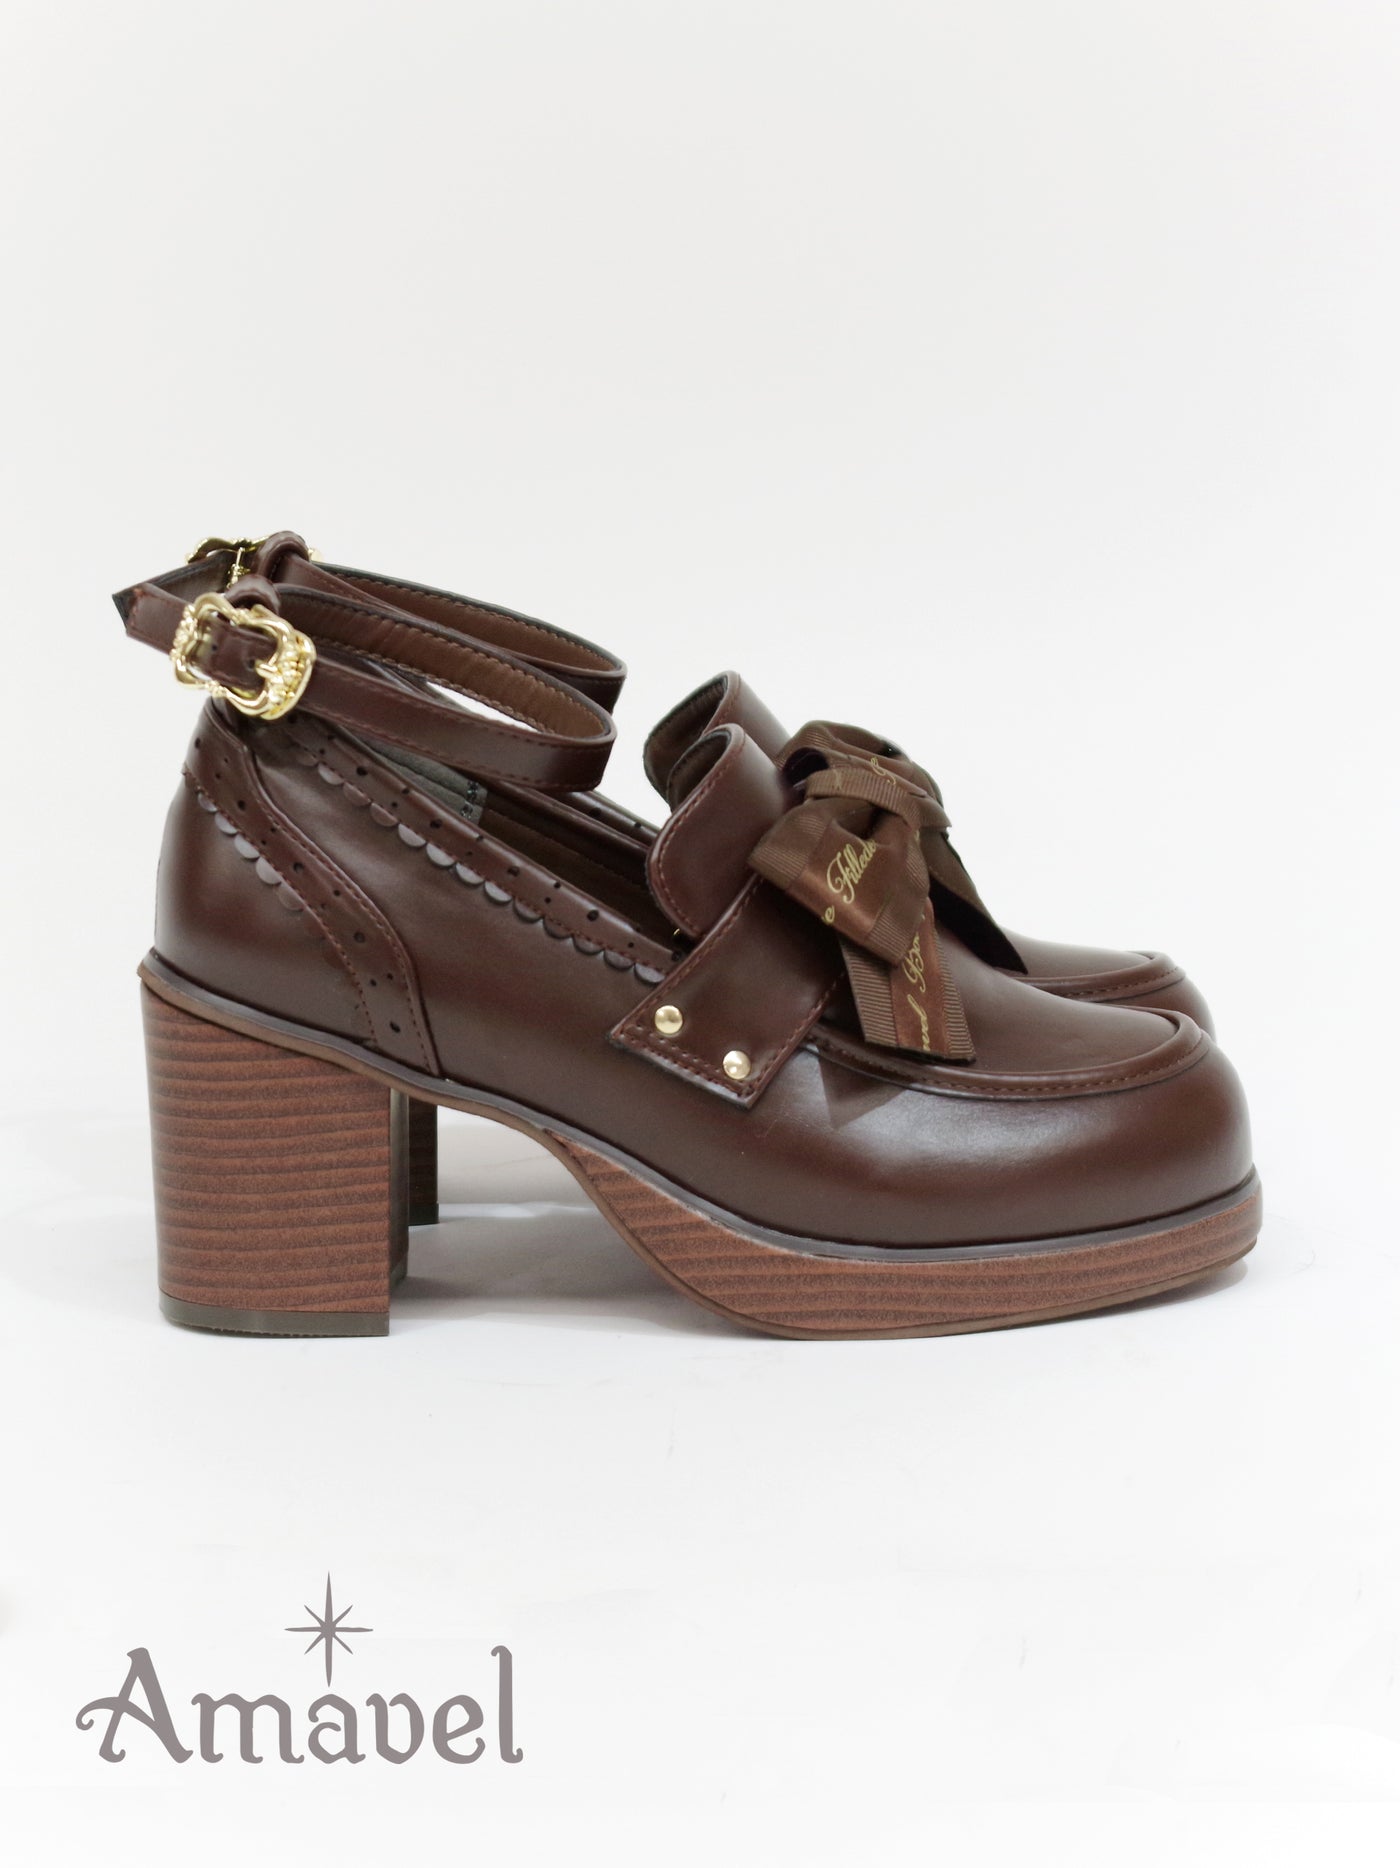 Chocolat Chat Delicious strappy loafer pumps